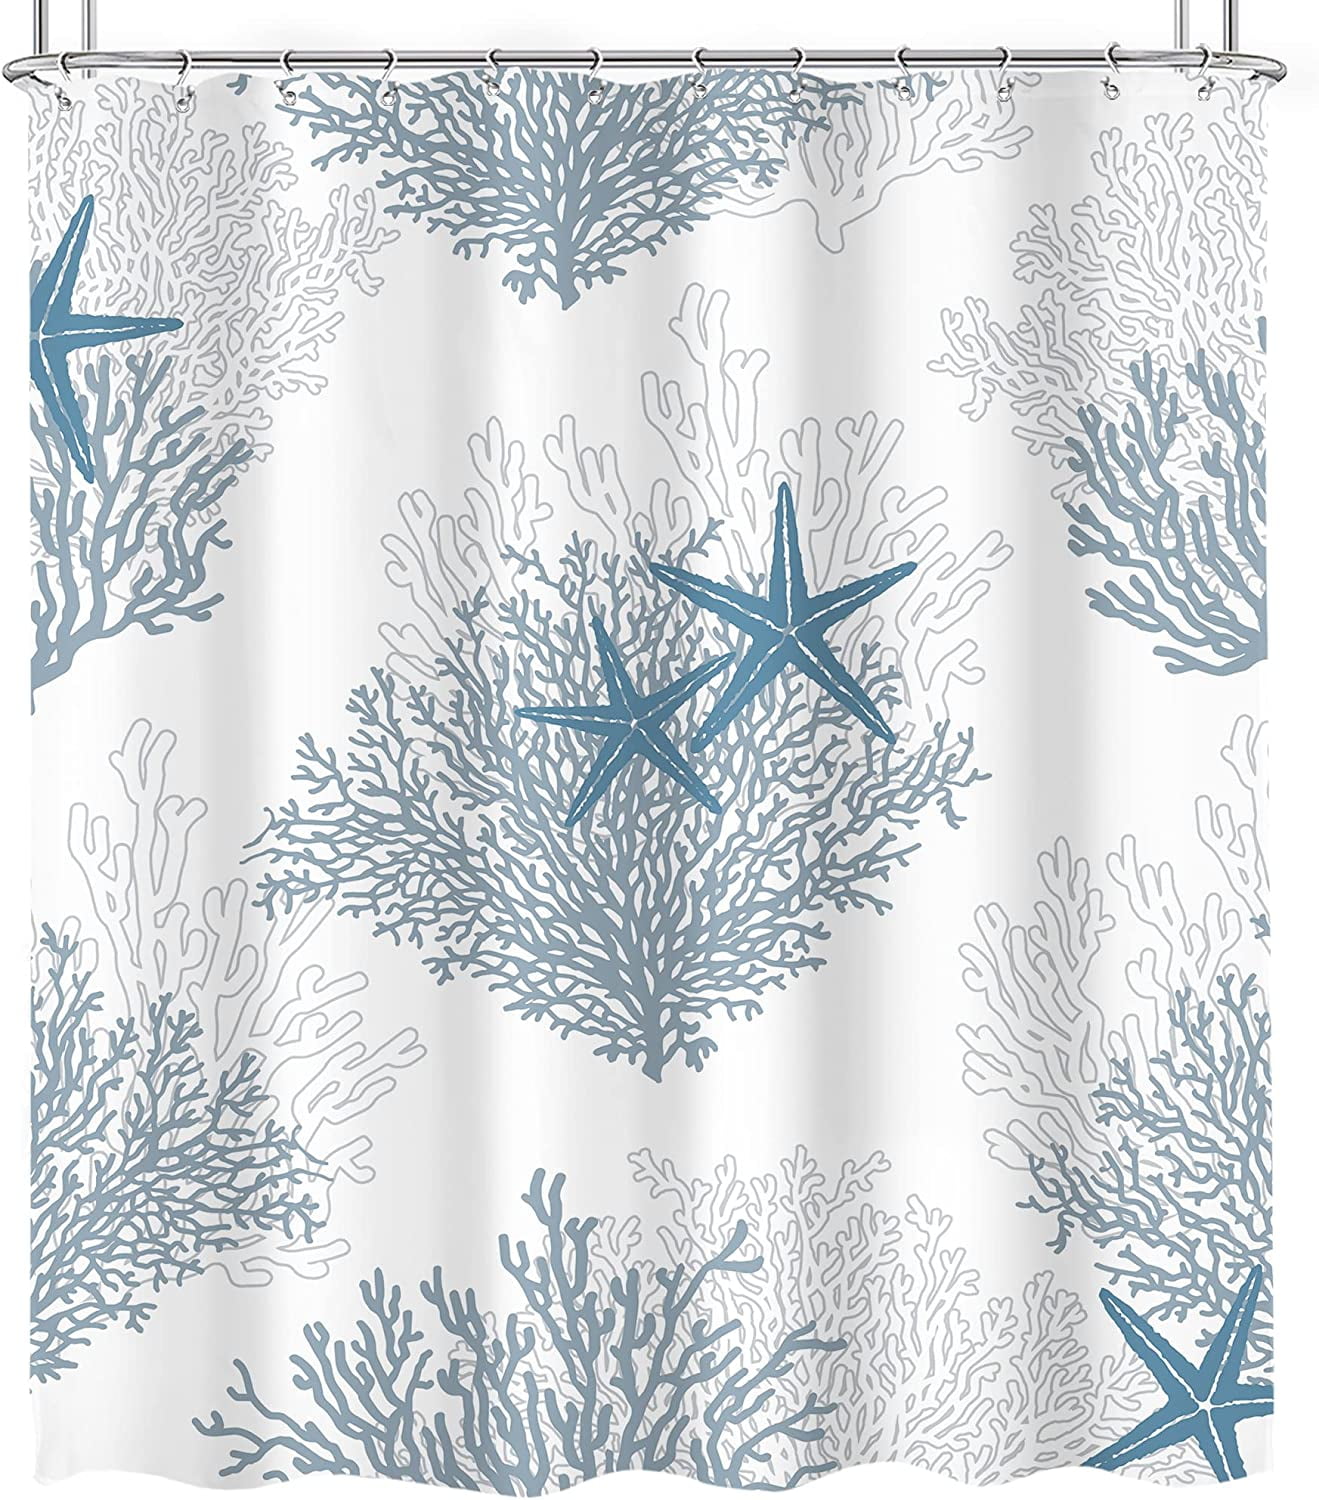 Newhomestyle Nautical Coastal Shower Curtain 72x72 Inch Lovely